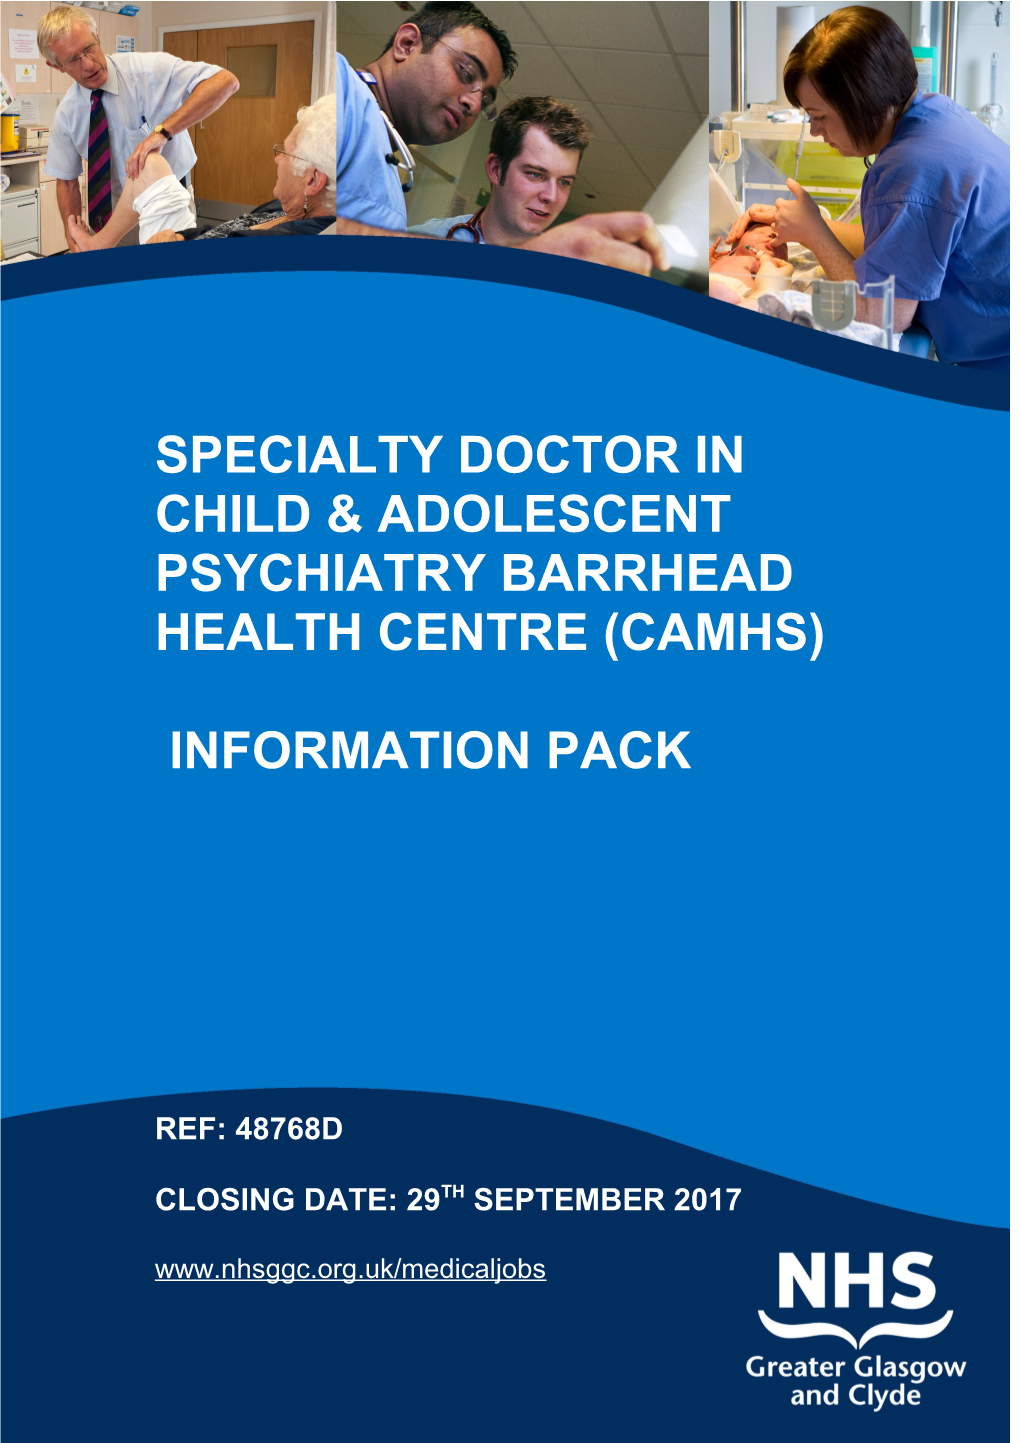 Specialty Doctor in CHILD & Adolescent Psychiatry BARRHEAD HEALTH Centre (CAMHS)